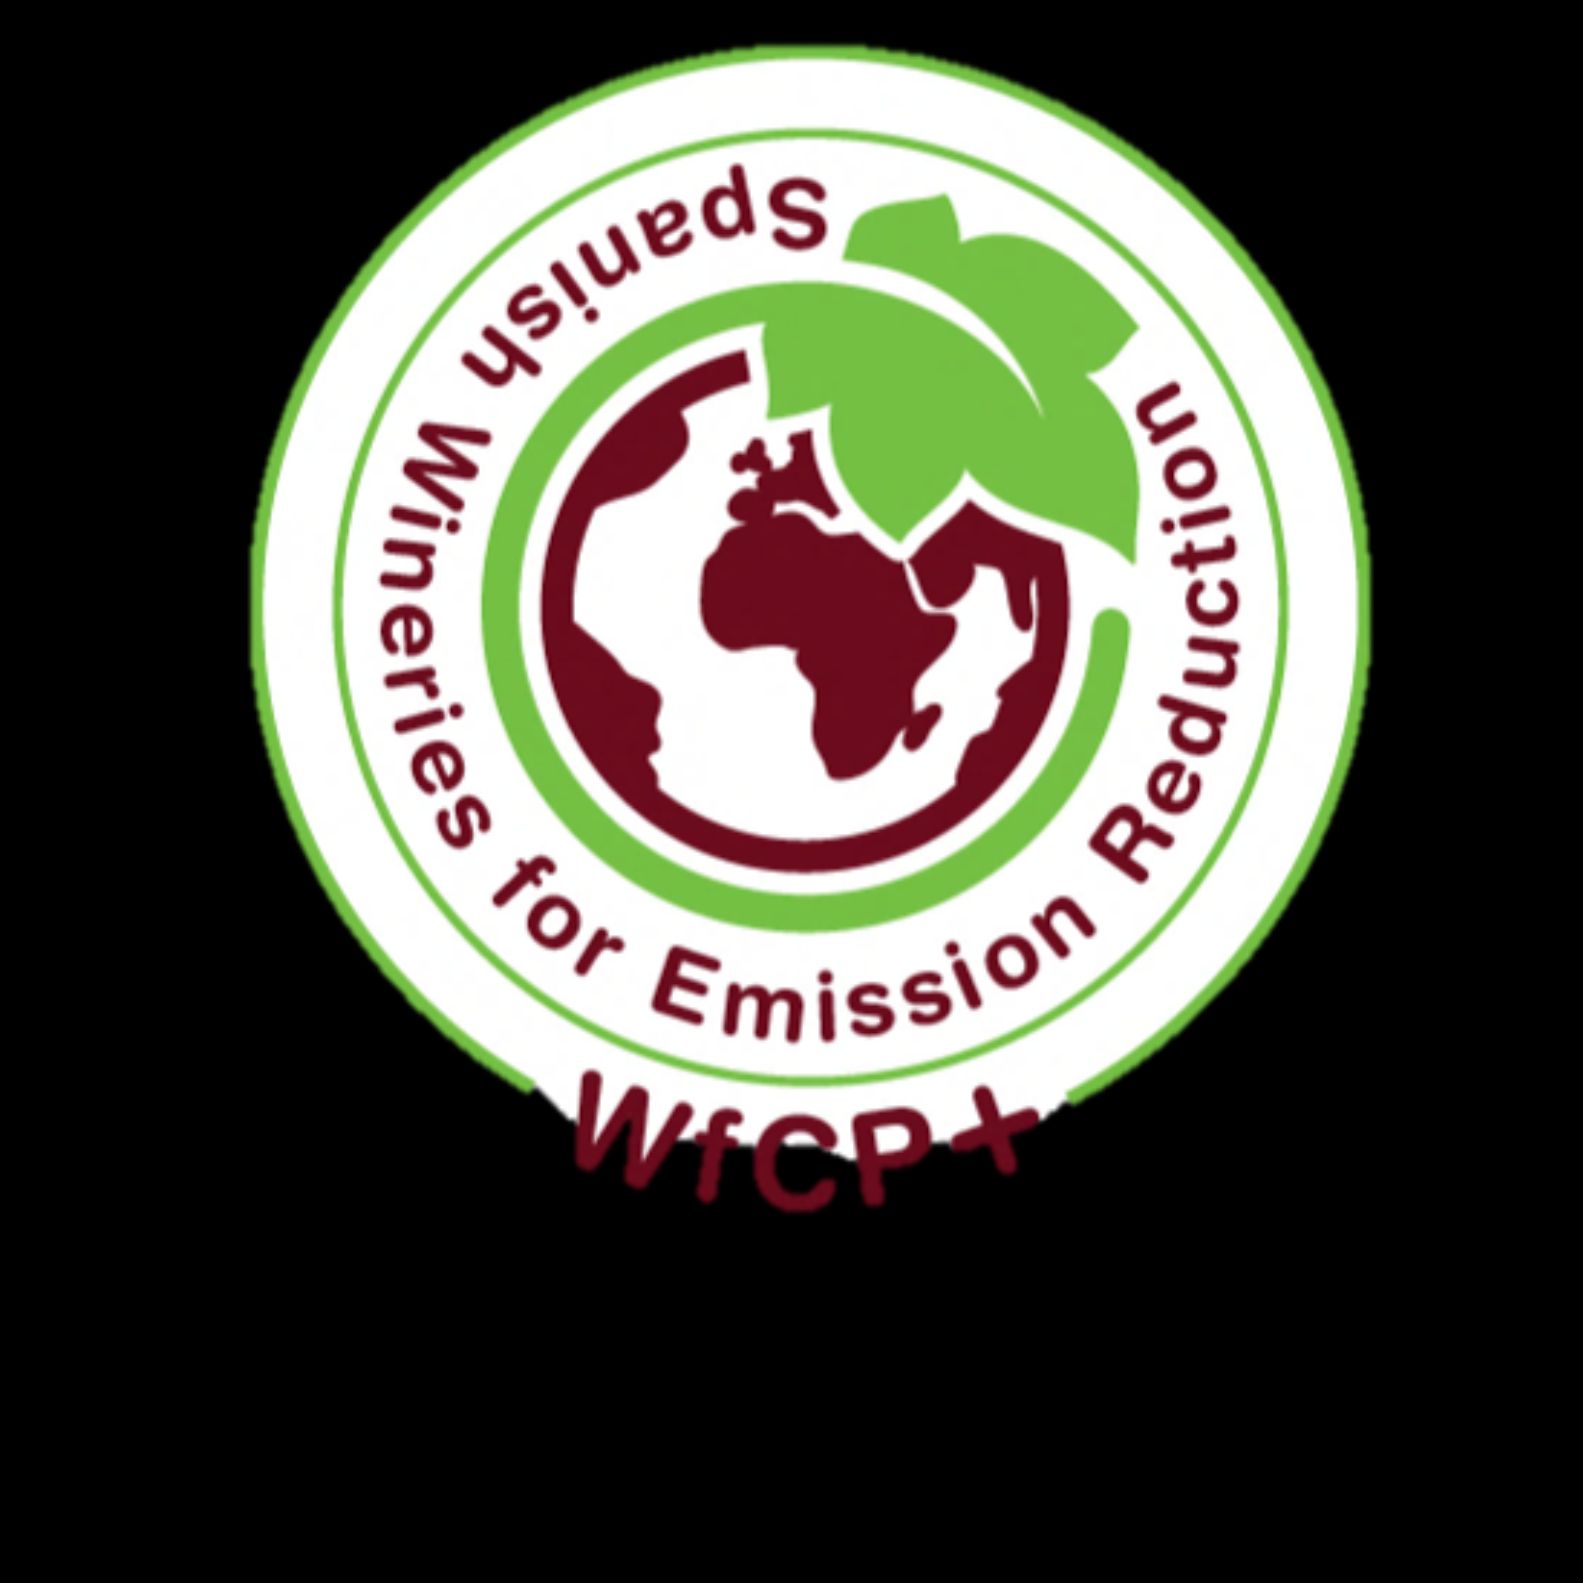 Spanish Wineries for Emission Reduction